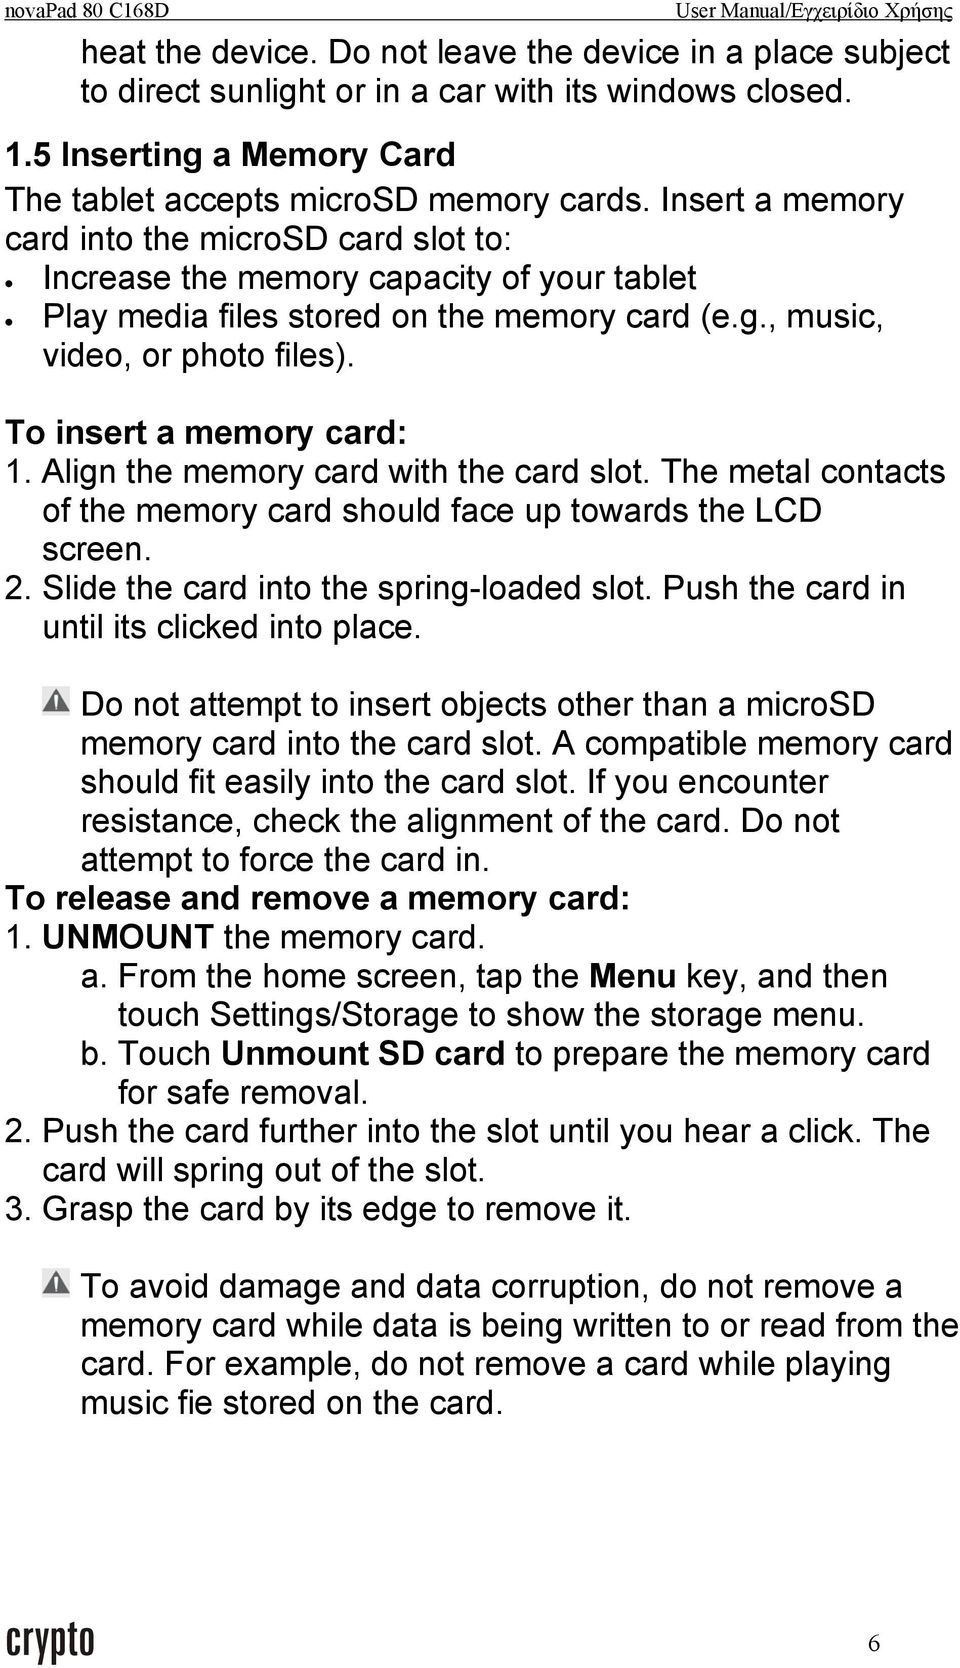 To insert a memory card: 1. Align the memory card with the card slot. The metal contacts of the memory card should face up towards the LCD screen. 2. Slide the card into the spring-loaded slot.